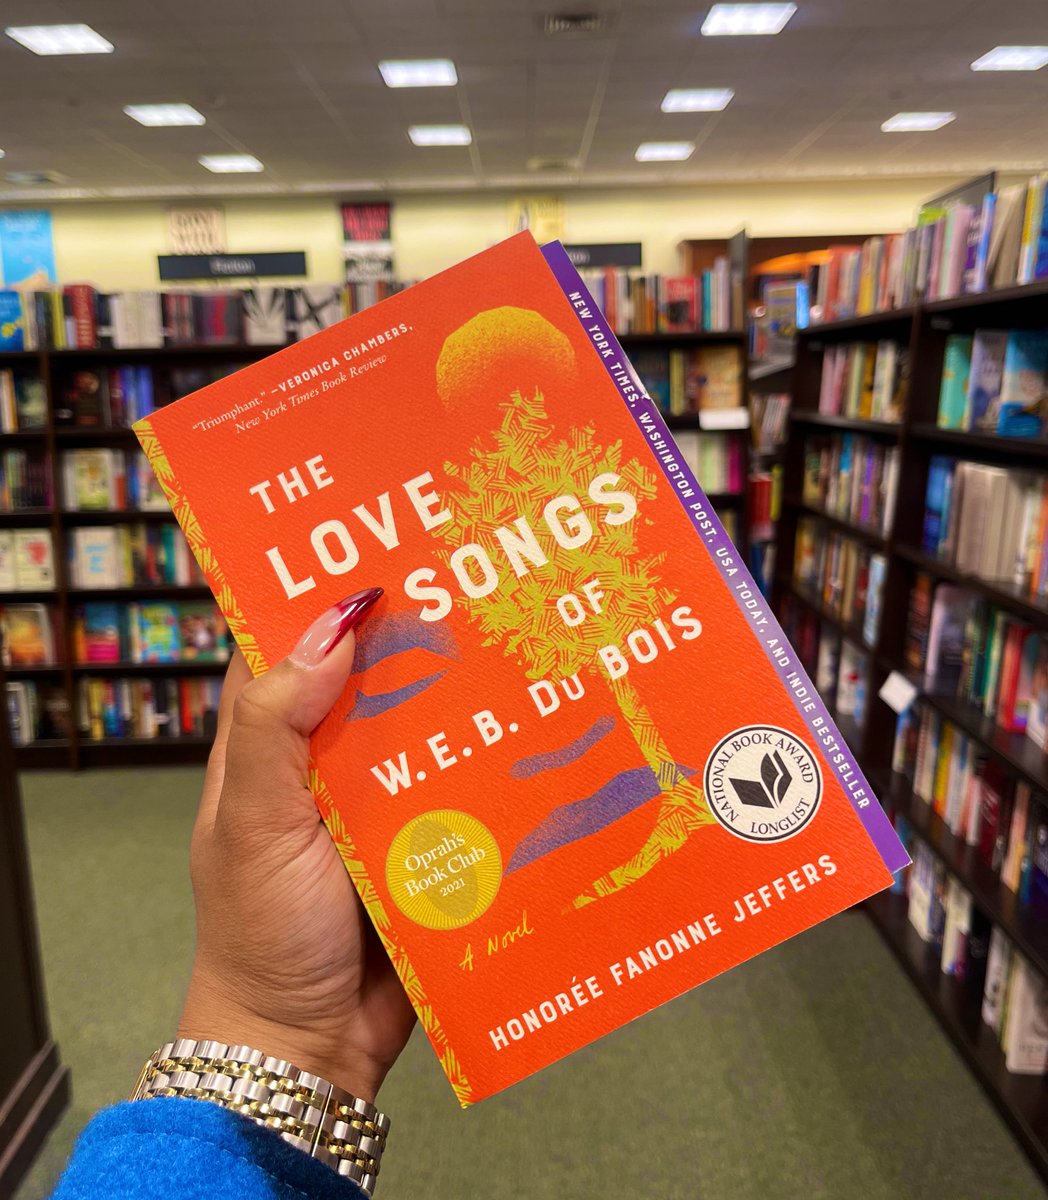 FINISHED! It took 40 days n 40 nights but proud I seen all 800 pages through. A brilliantly layered story expounding on the depth of black souls in america. So many quotes to reference; listing them all will do no justice. 10/10 @BlkLibraryGirl #LoveSongsofWEBDuBois